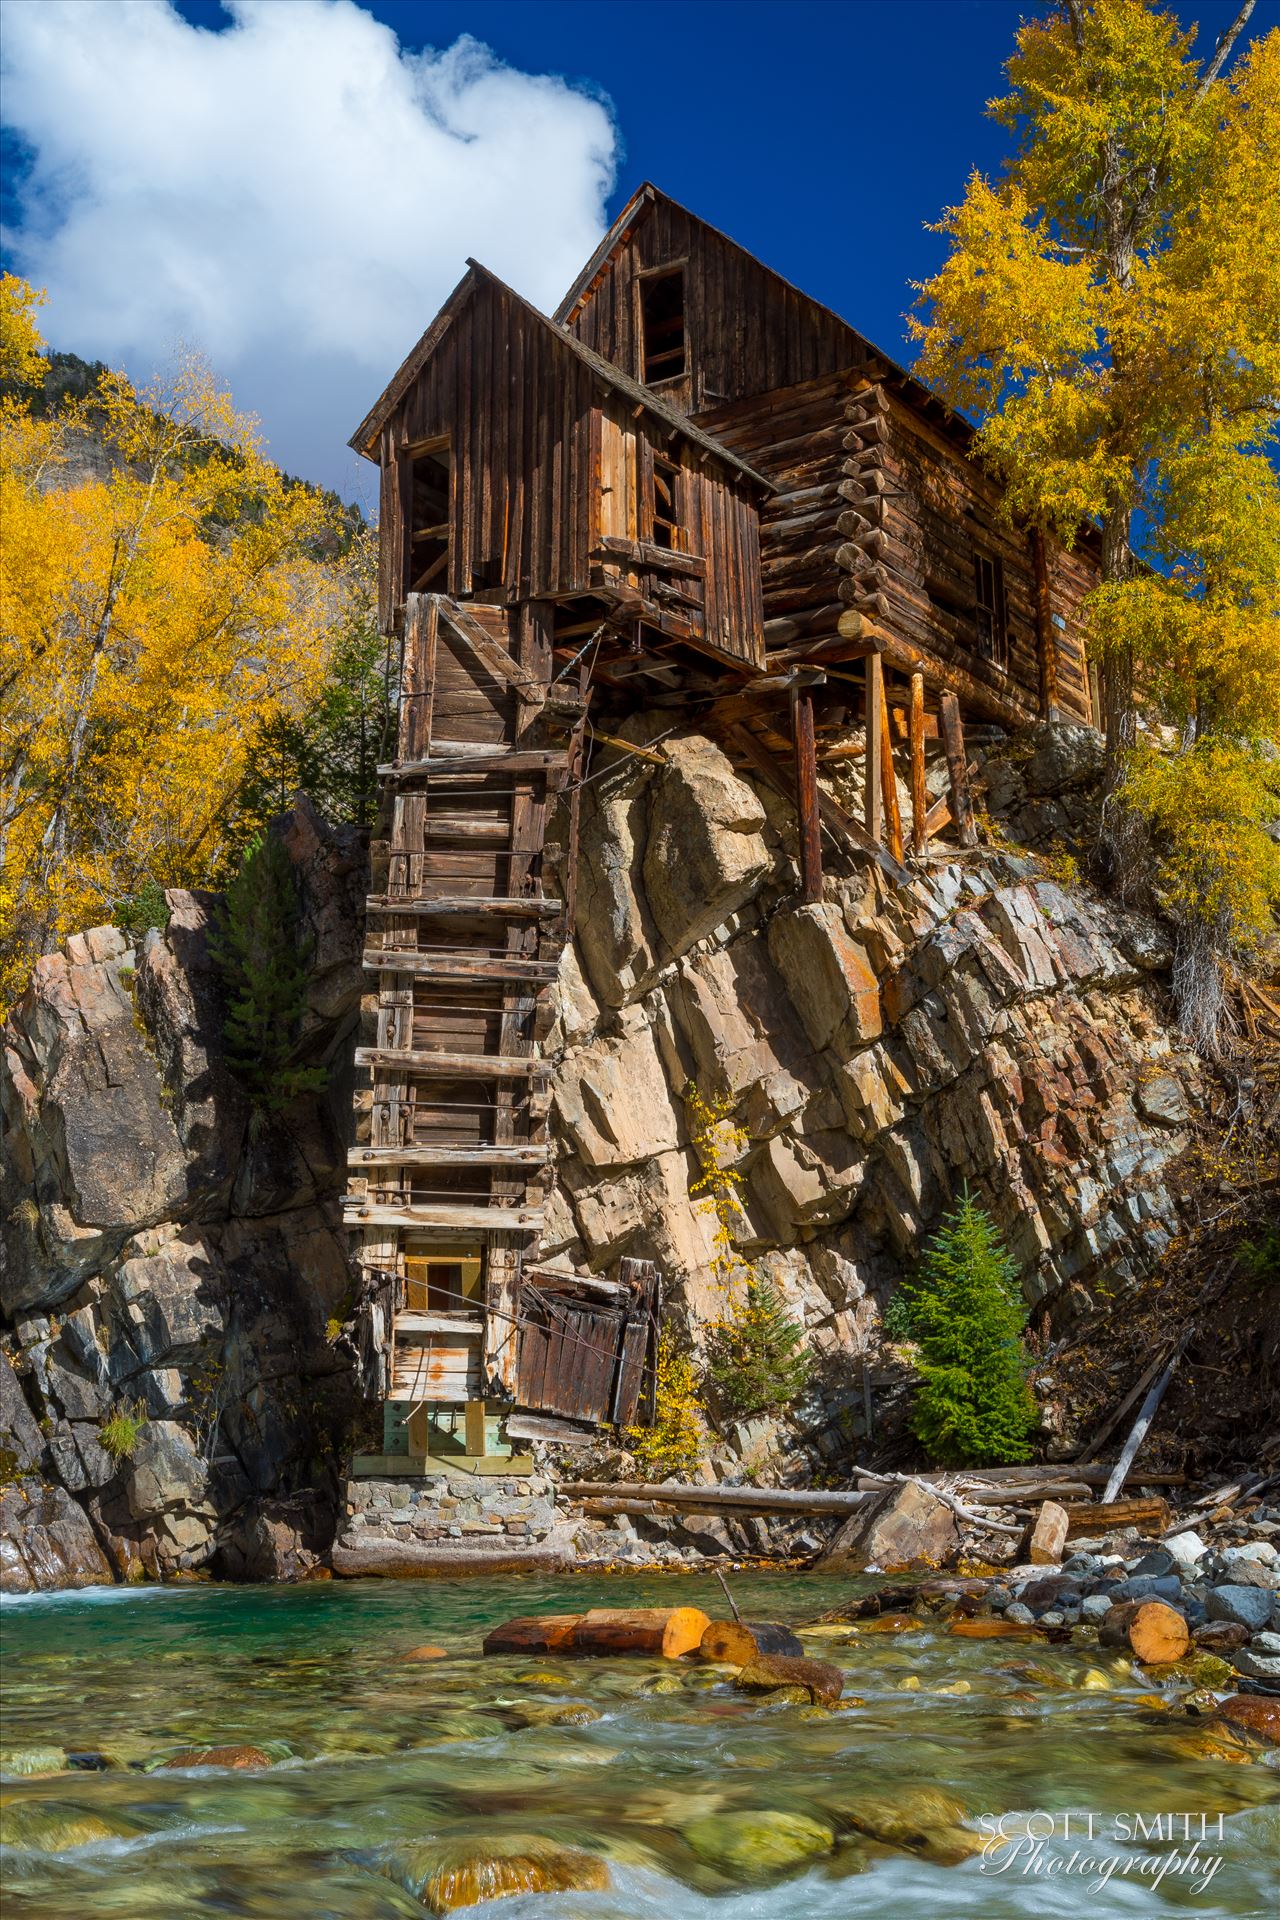 Crystal Mill, Colorado 06 - The Crystal Mill, or the Old Mill is an 1892 wooden powerhouse located on an outcrop above the Crystal River in Crystal, Colorado by Scott Smith Photos